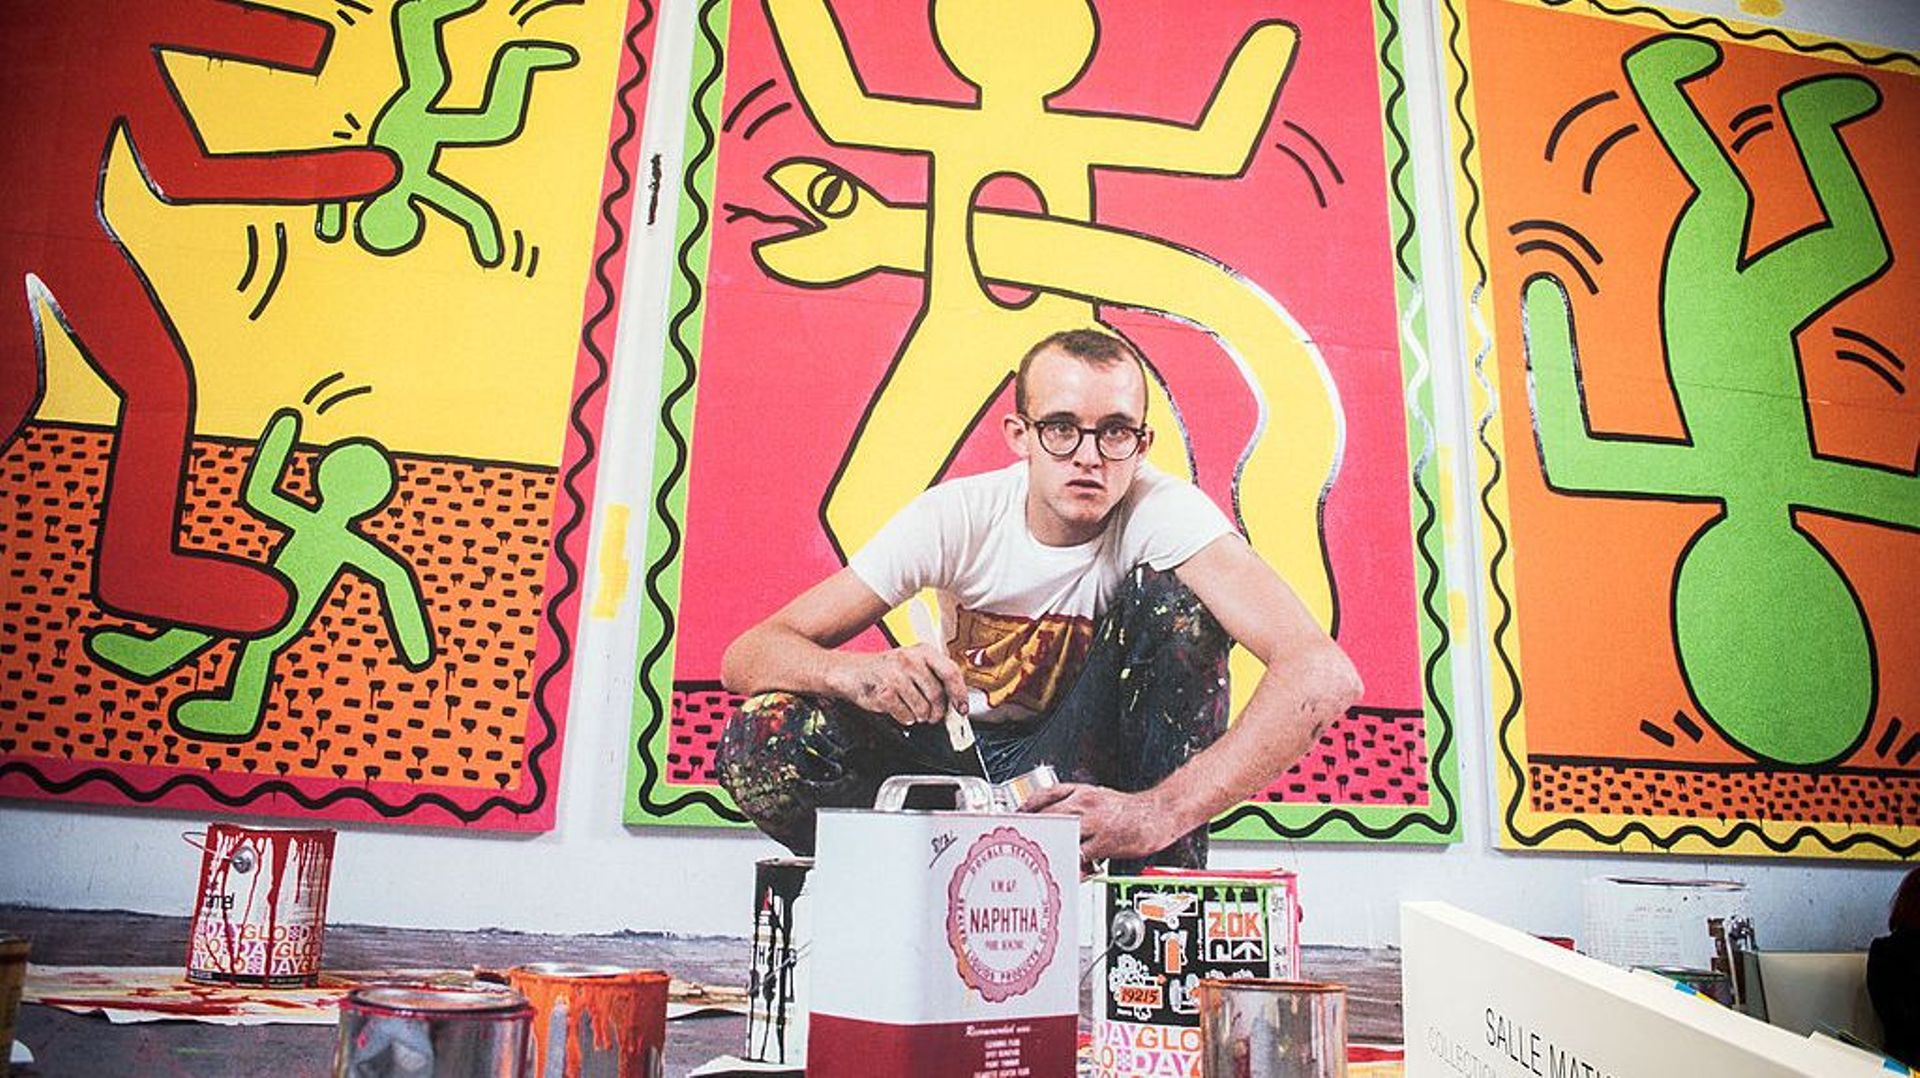 'Keith Haring' Exhibition Preview At Le Musee D'Art Moderne In Paris